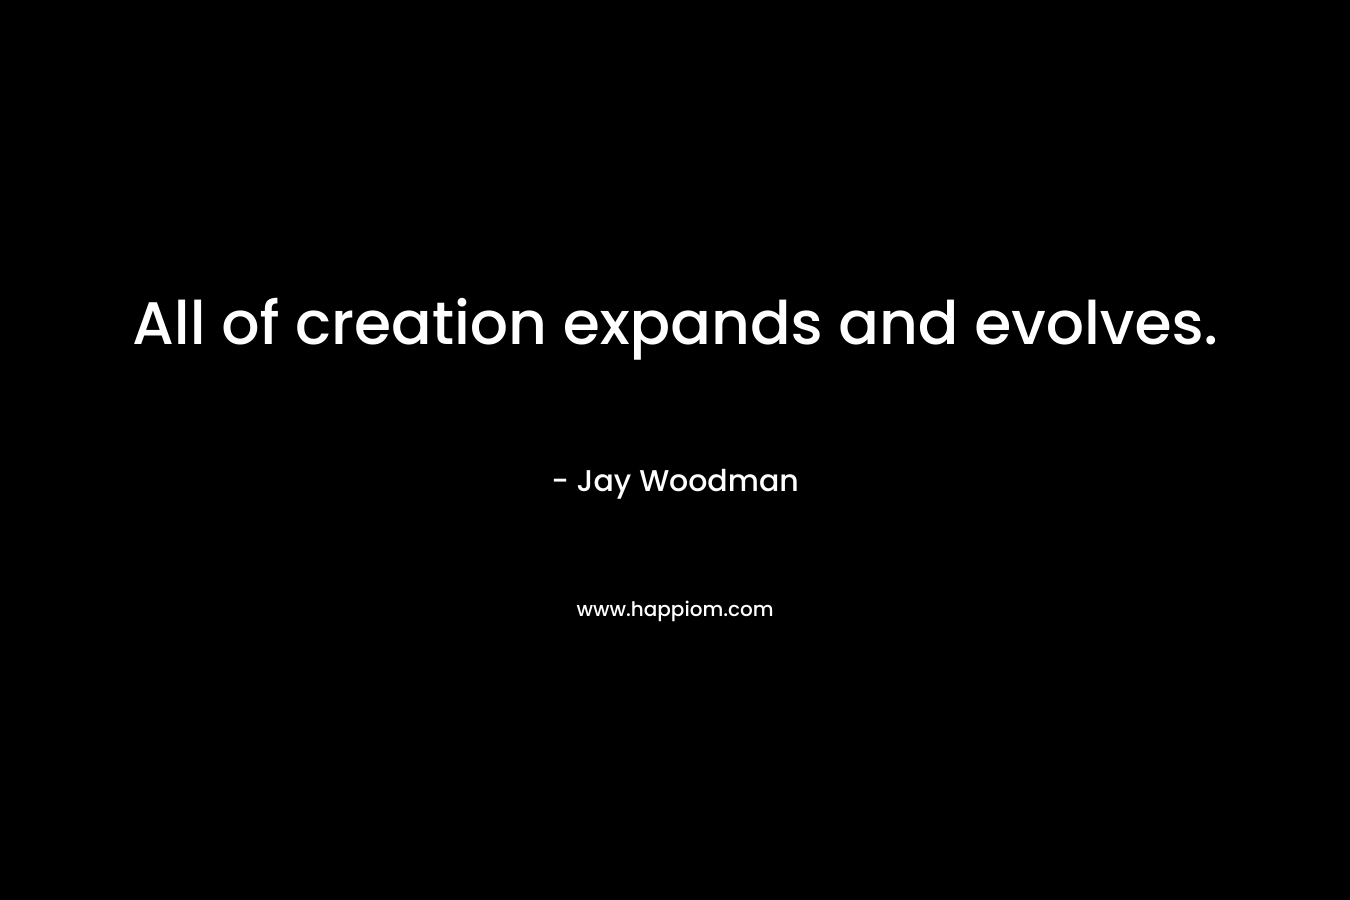 All of creation expands and evolves.